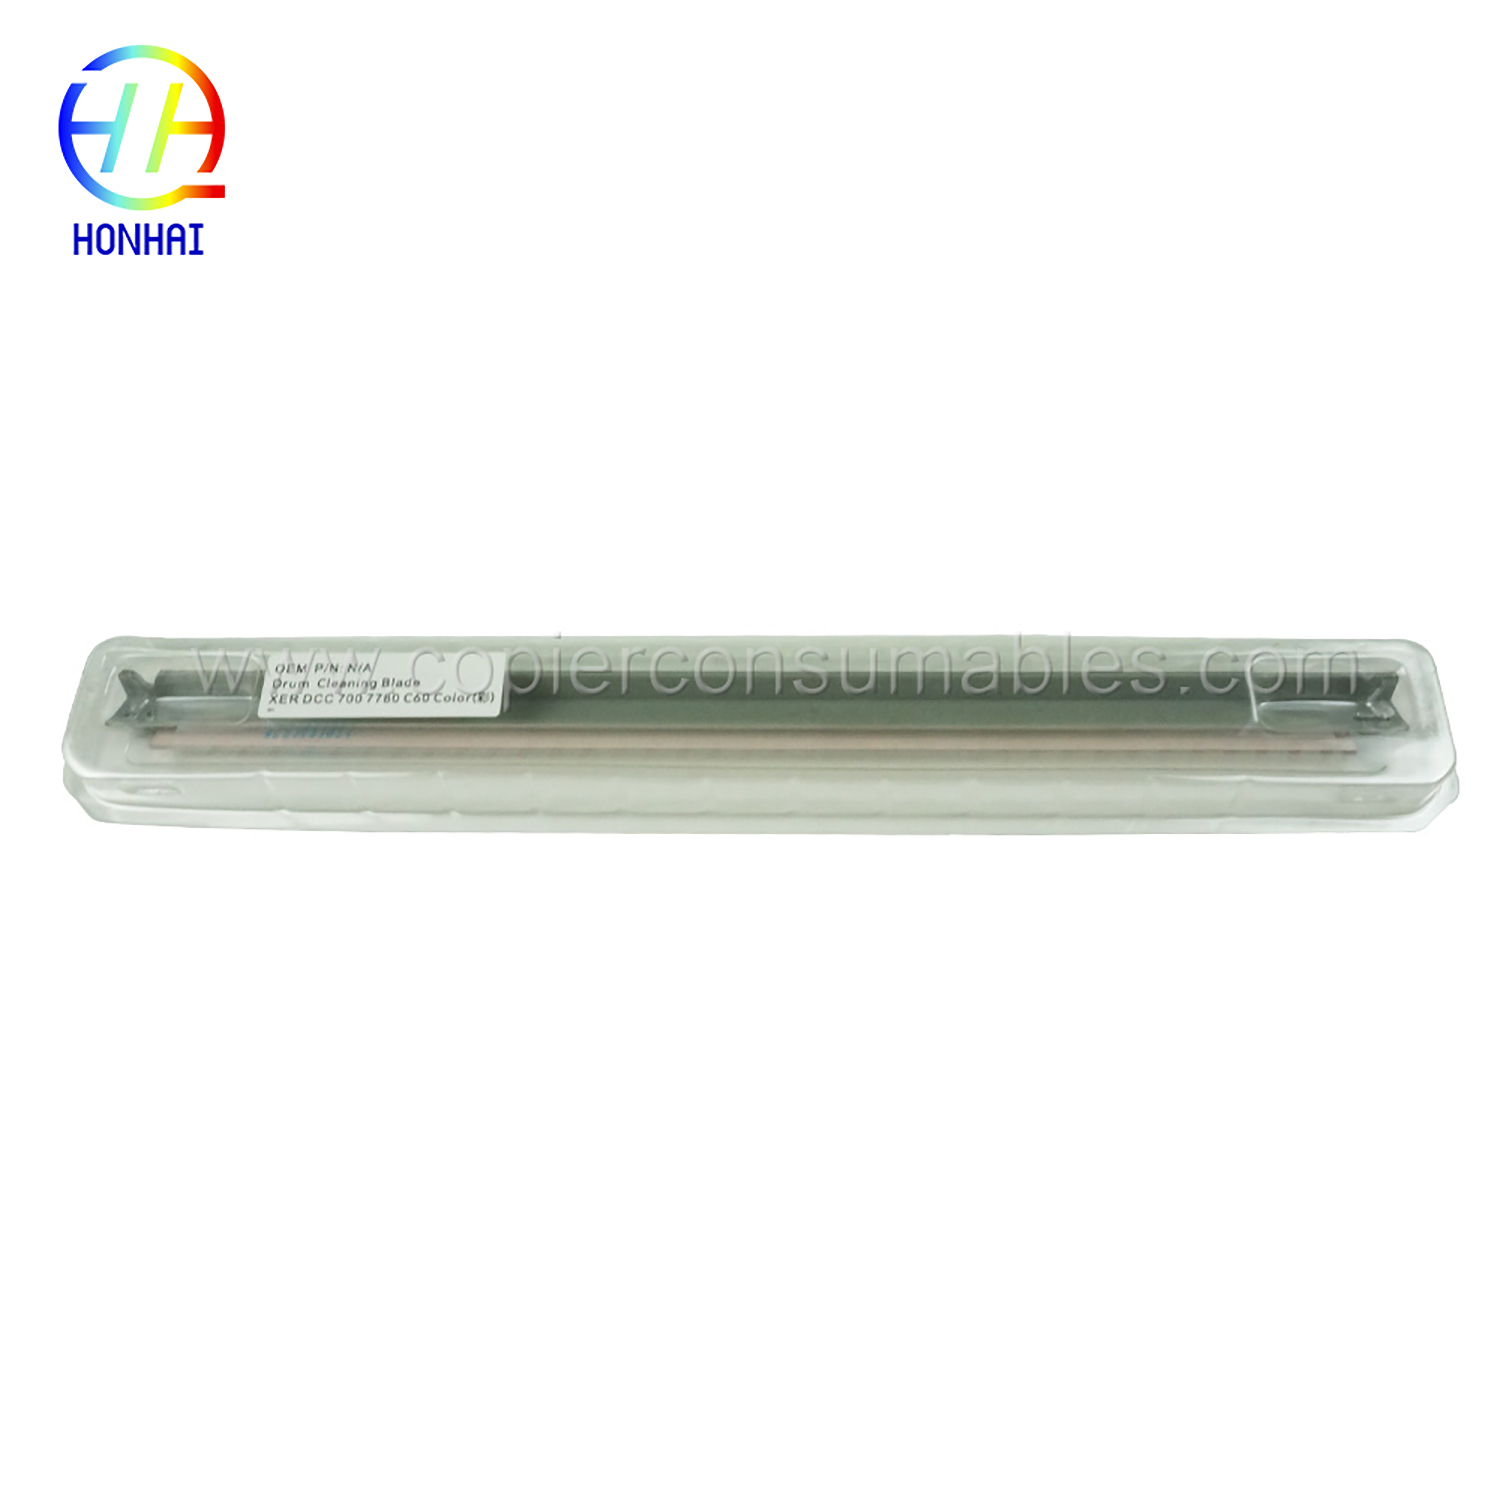 Drum Cleaning Blade color សម្រាប់ Xerox DCC700 7780 C60 (1) 拷贝